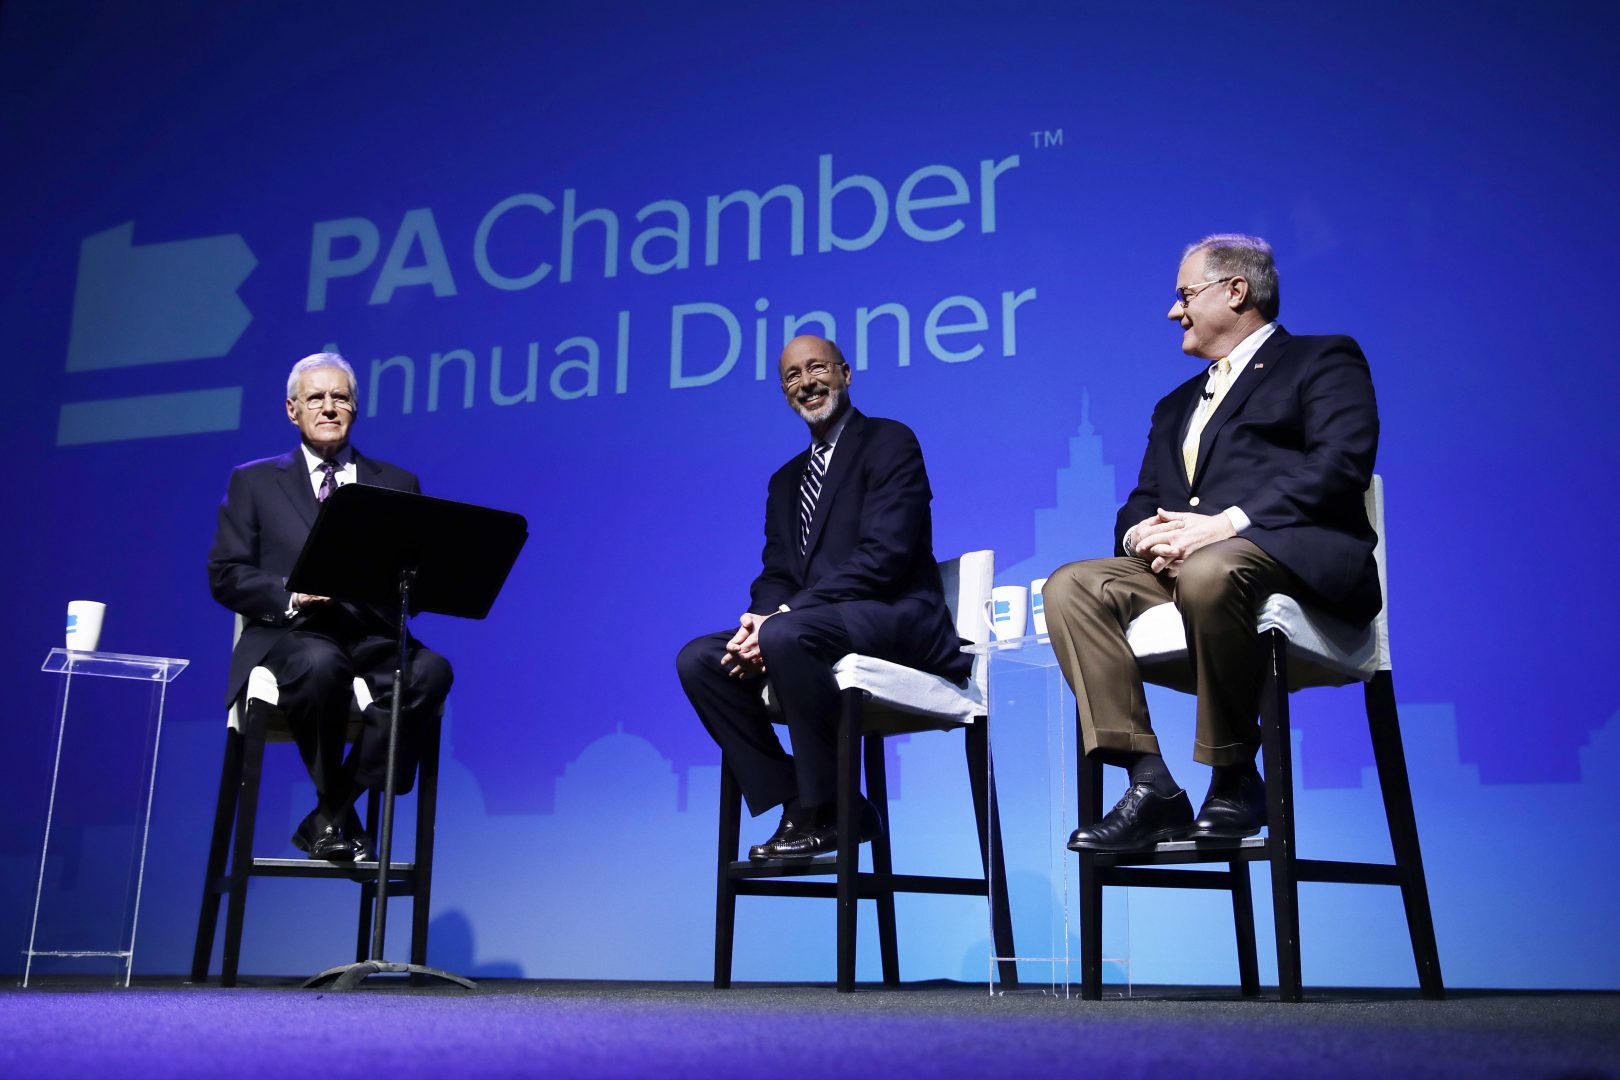 Alex Trebek, left, moderates a gubernatorial debate between Democratic Gov. Tom Wolf, center, and Republican Scott Wagner in Hershey, Pa., Monday, Oct. 1, 2018. The debate is hosted by the Pennsylvania Chamber of Business and Industry. 